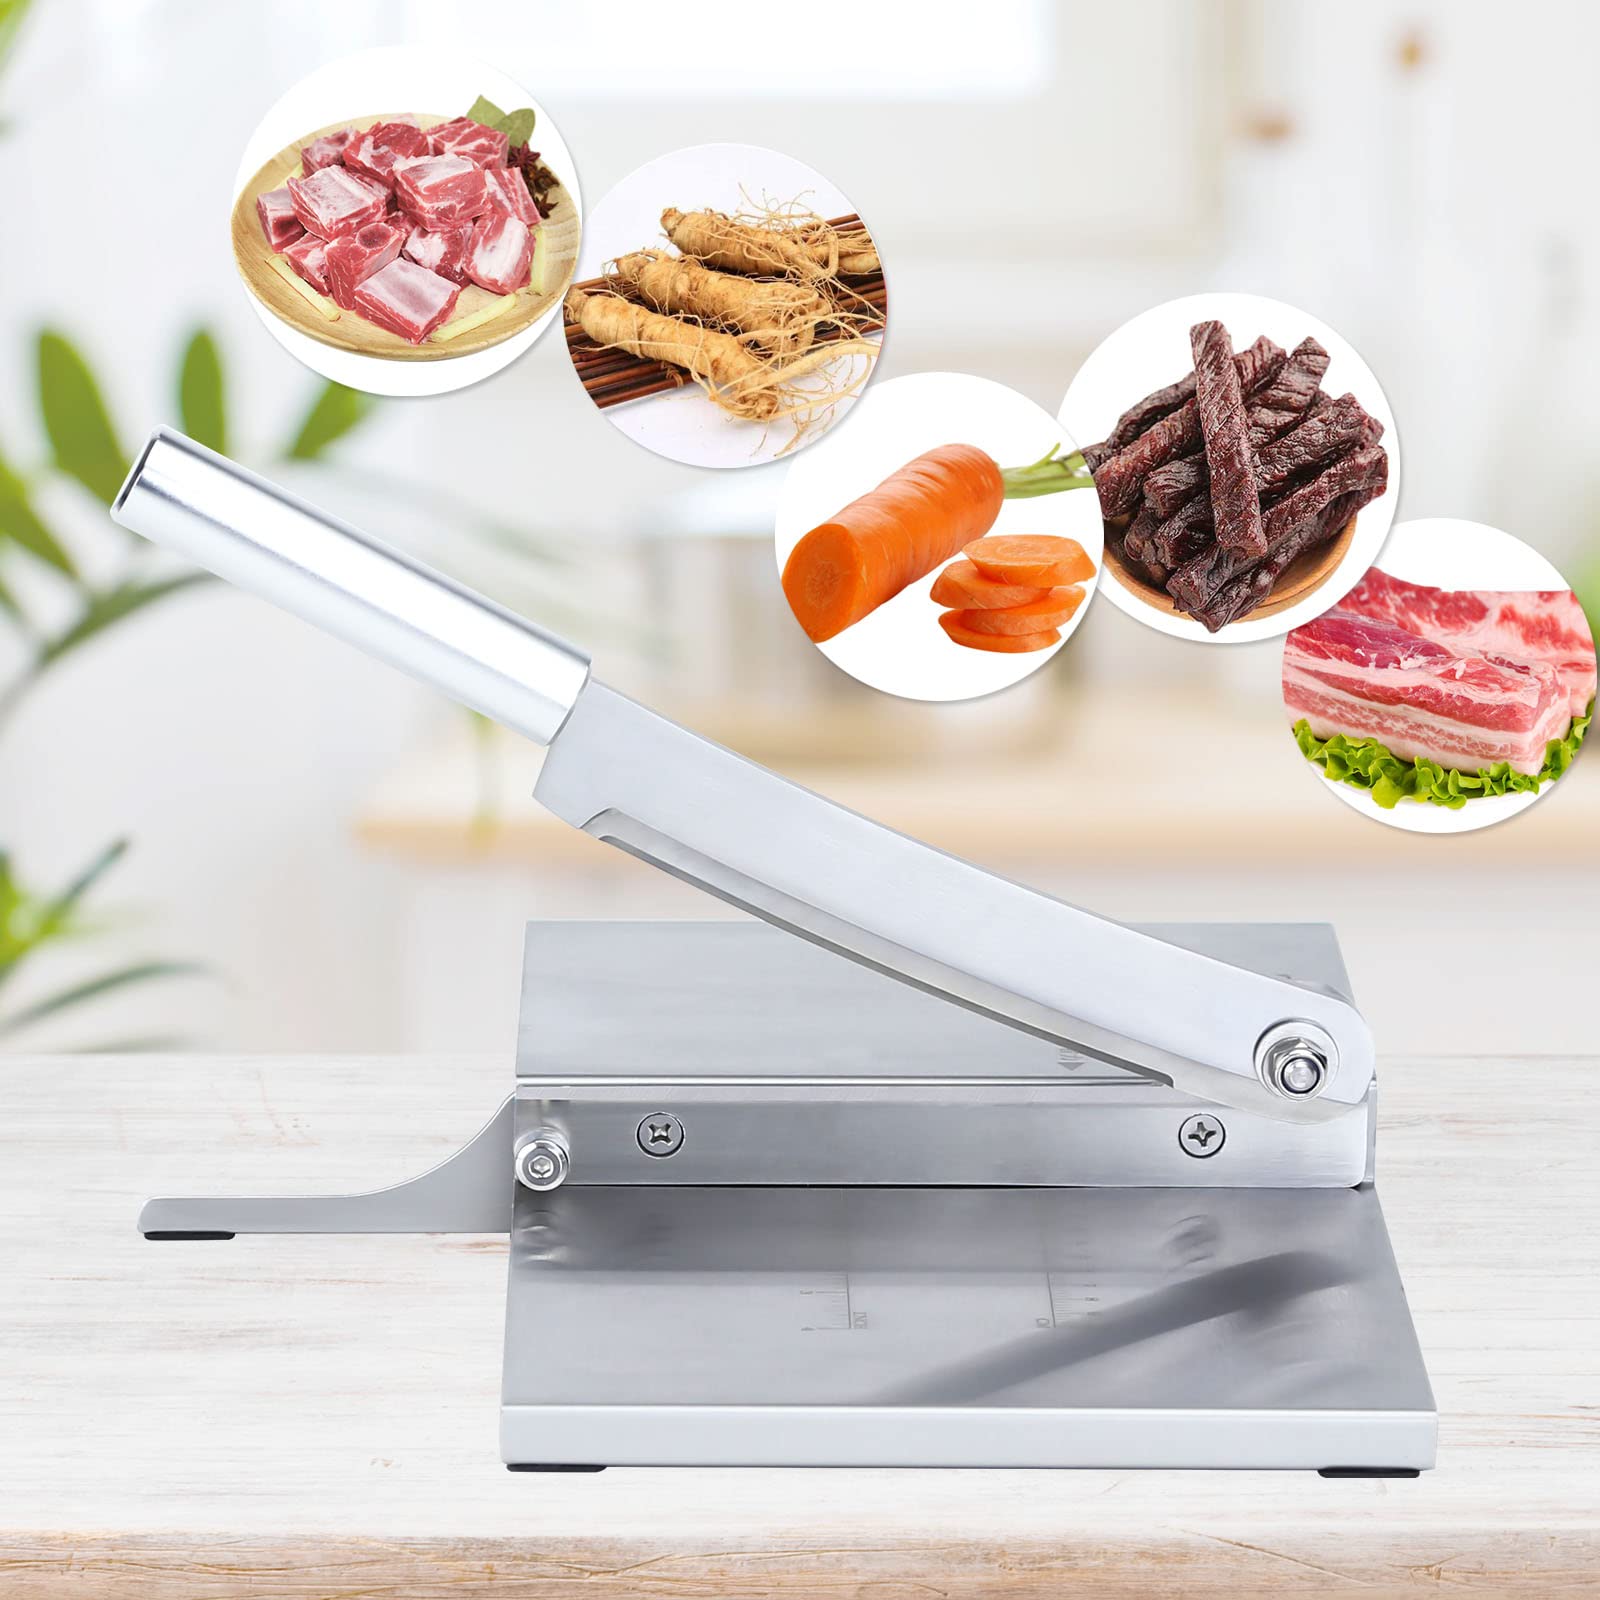 Medozic Manual Meat Slicer, Stainless Steel Household Cutter Machine, Meat Slicer For Beef Jerky Chicken Bacon And Corn